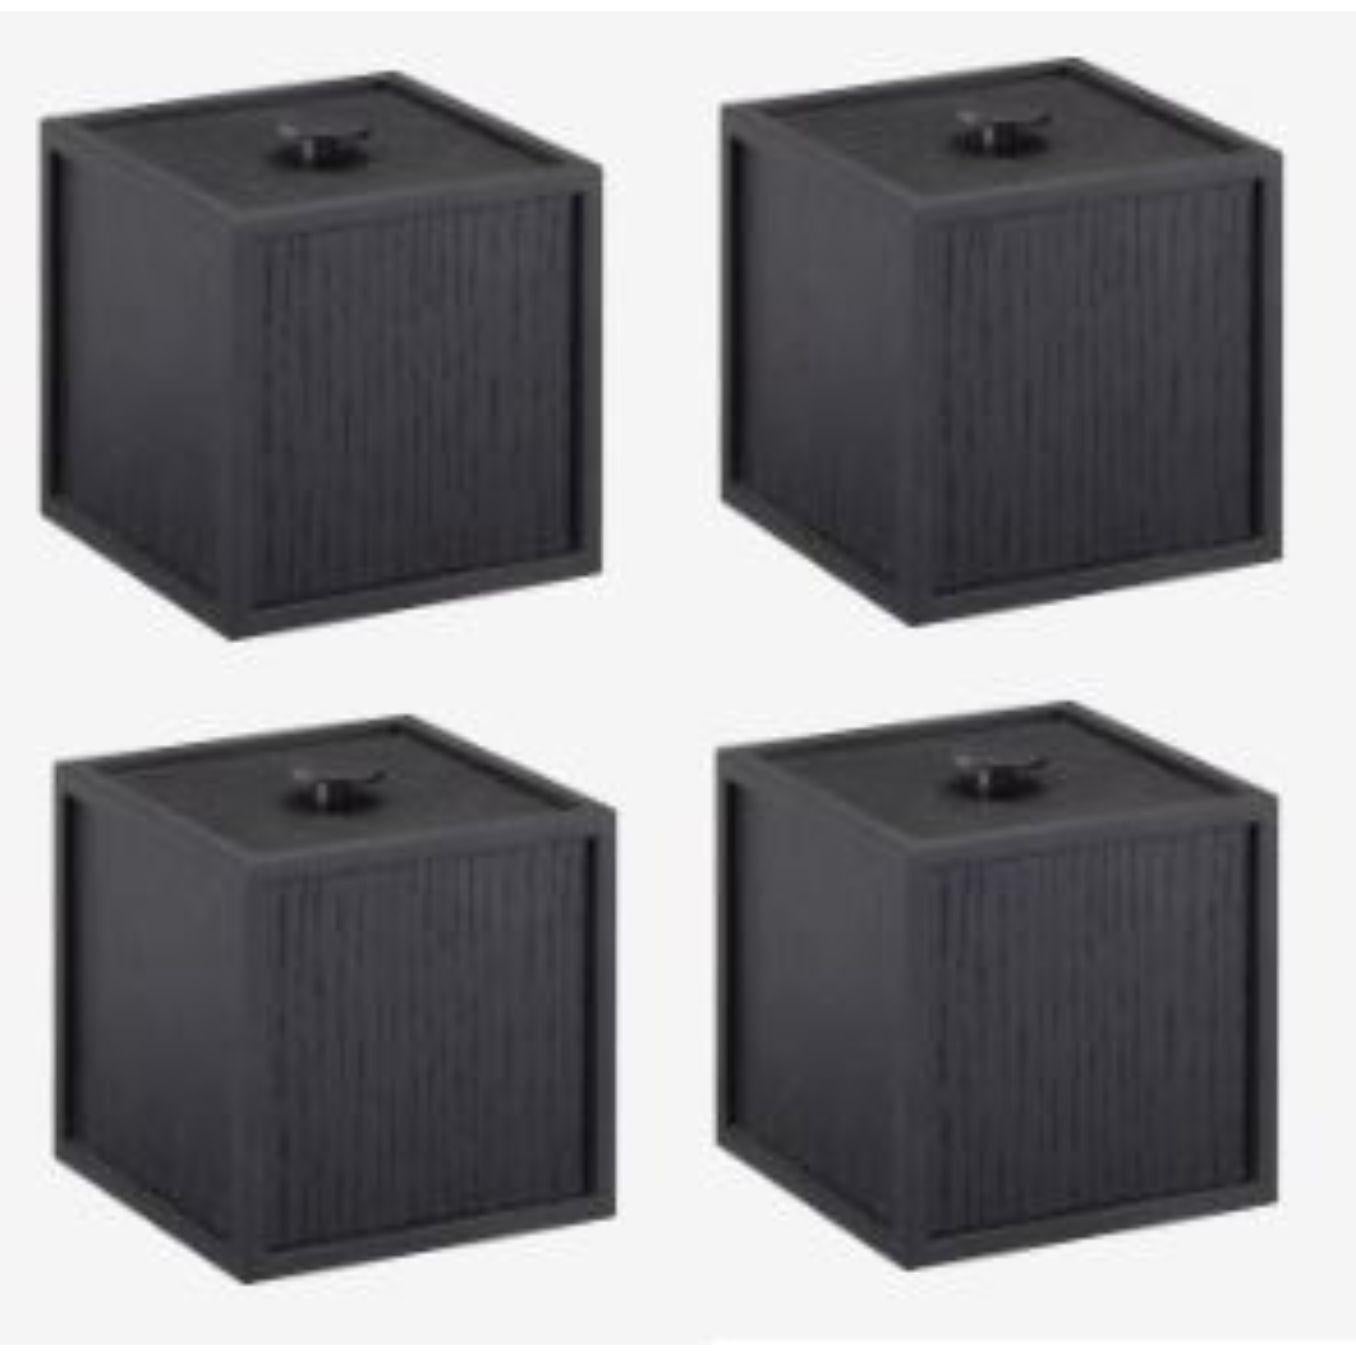 Set of 4 black ash frame 10 box by Lassen
Dimensions: D 10 x W 10 x H 10 cm 
Materials: Finér, Melamin, Melamine, Metal, Veneer
Weight: 0.85 Kg

Frame Box is a square box in a cubistic shape. The simple boxes are inspired by the Kubus